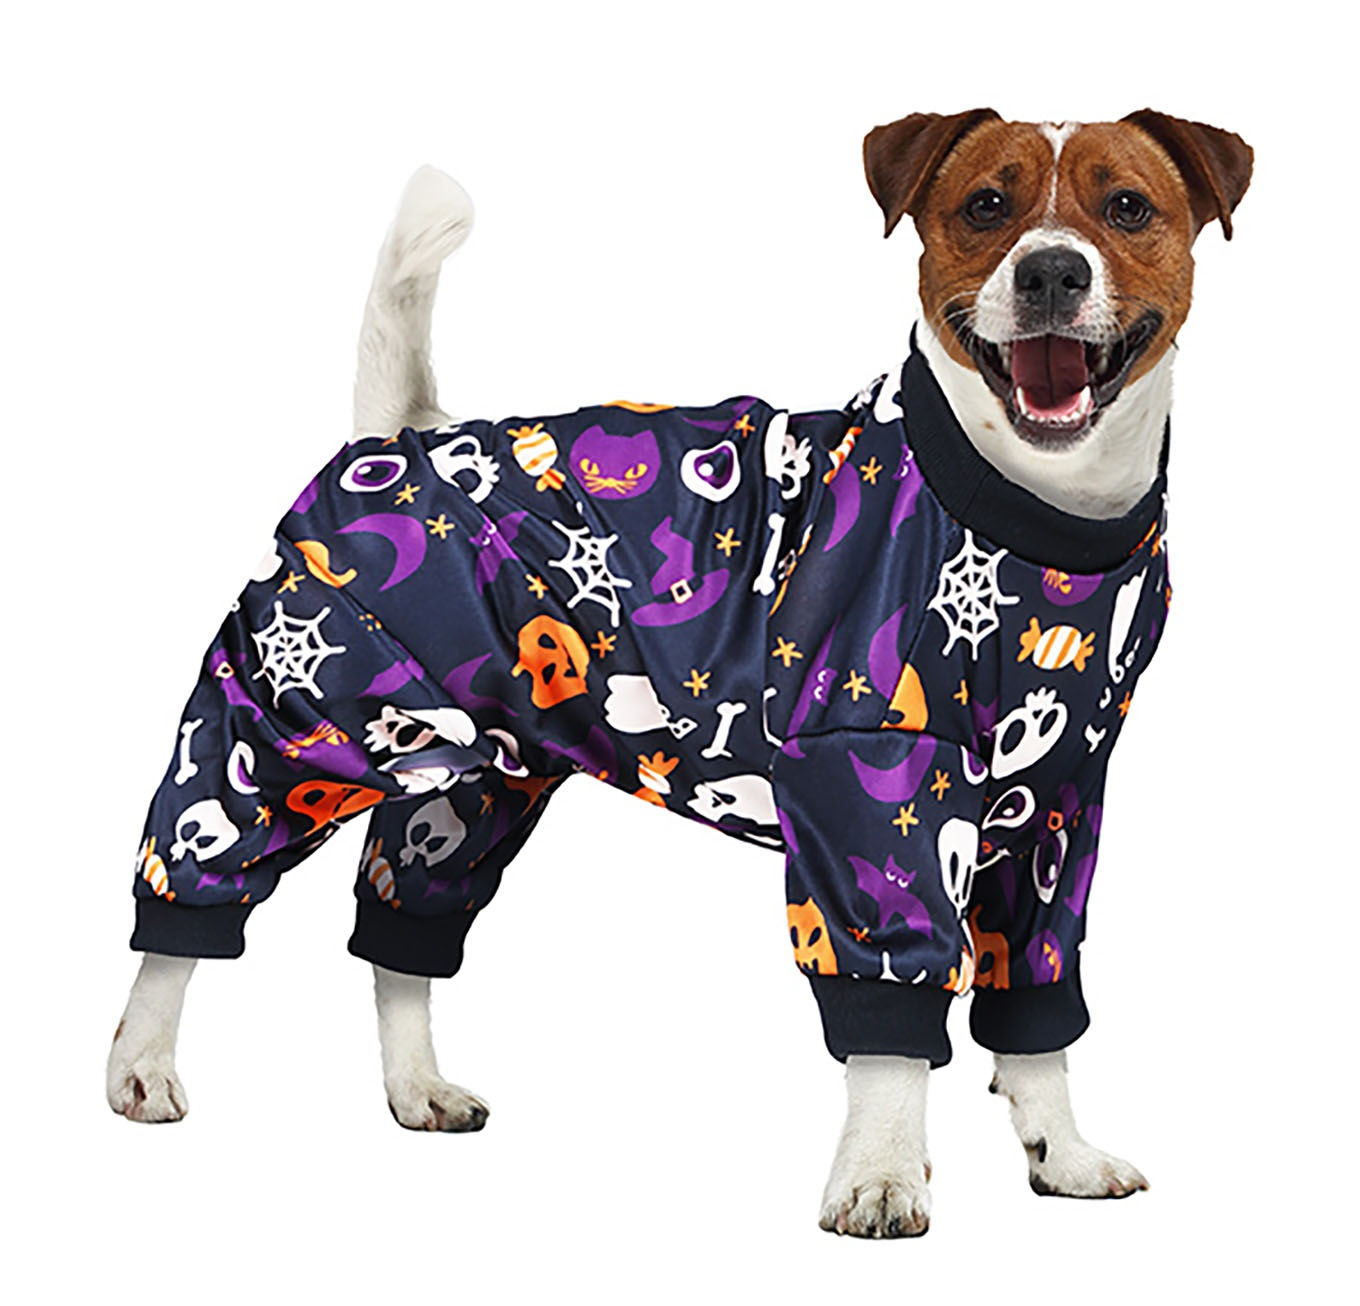 Dog Overall - Halloween Costumes for Dogs: M